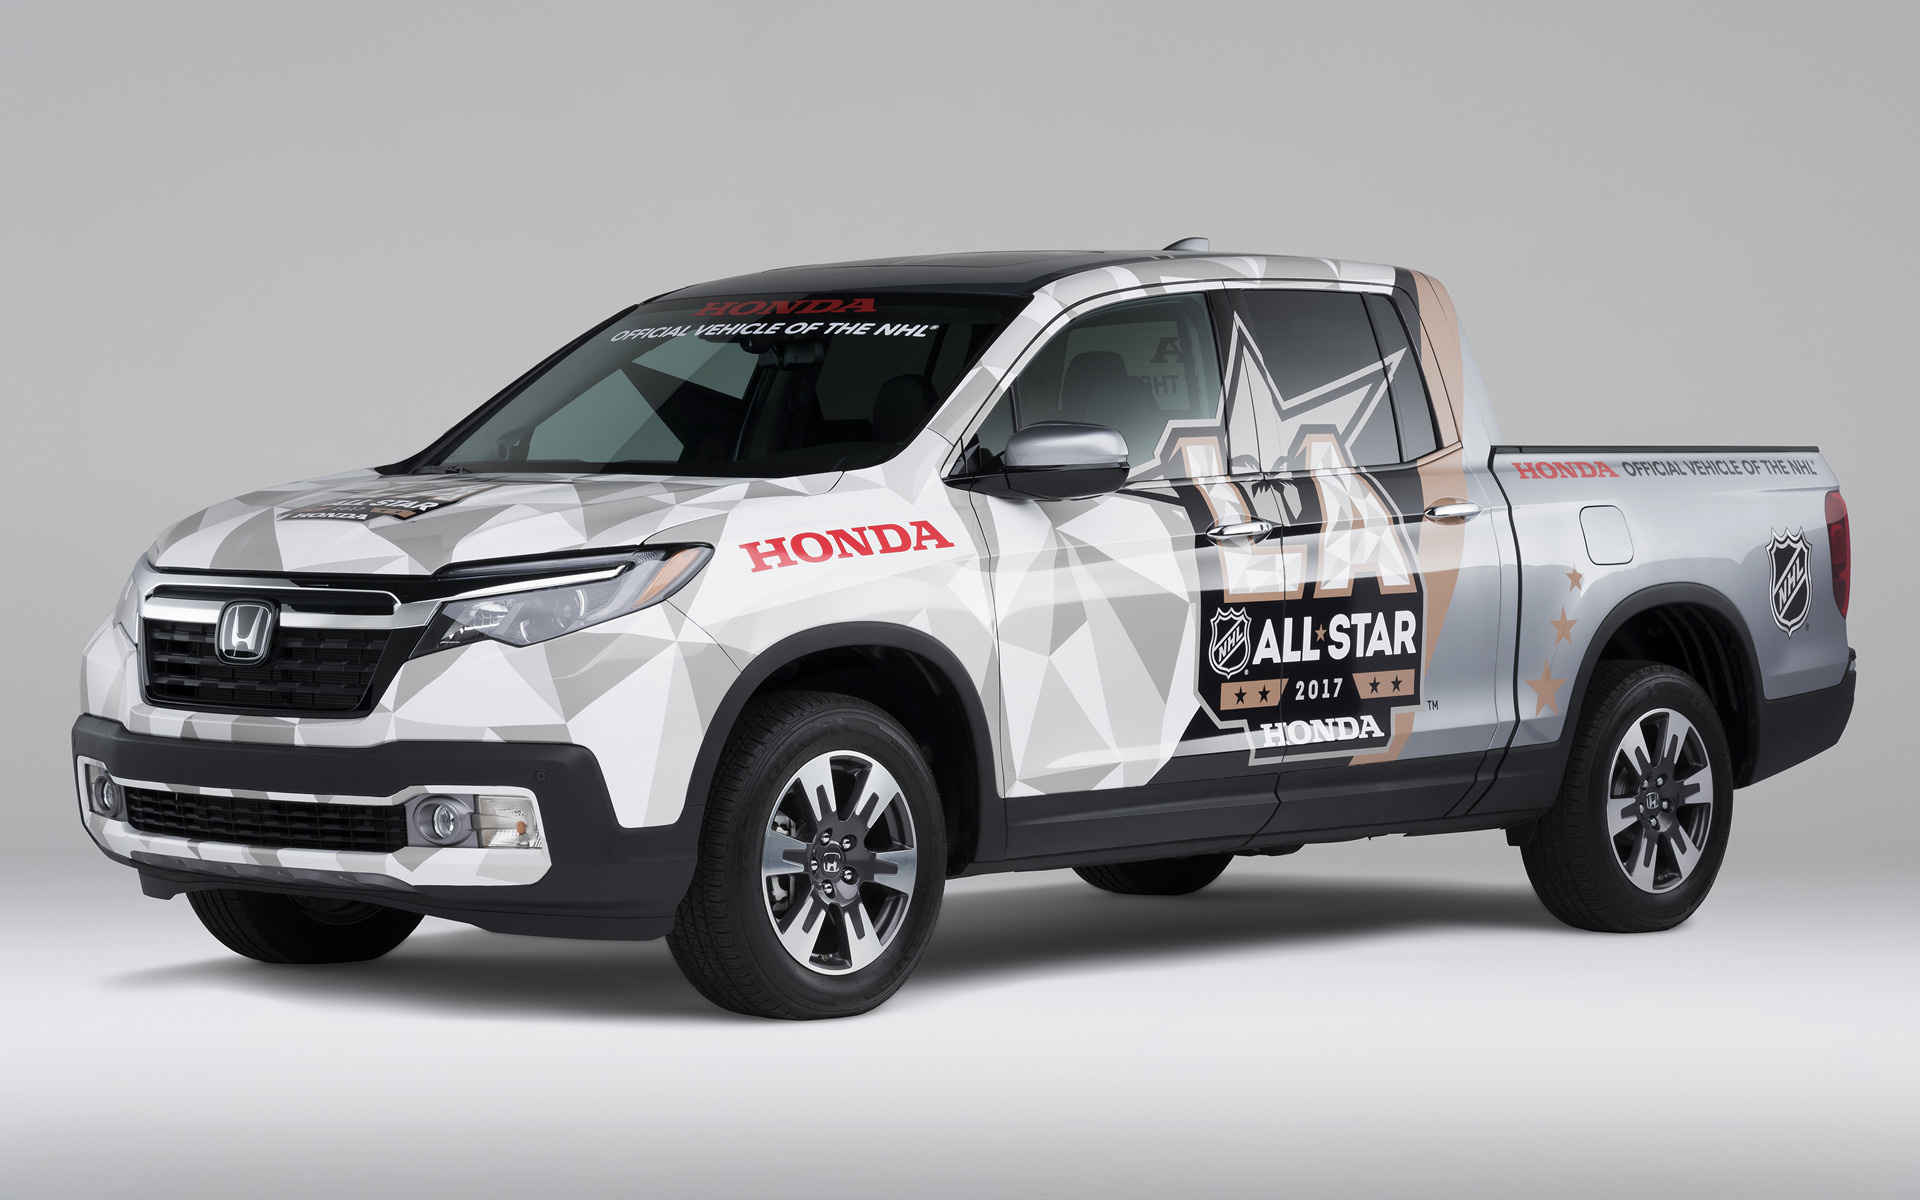 2017 Honda Ridgeline NHL All-Star Game - Wallpapers and HD Images | Car Pixel1920 x 1200